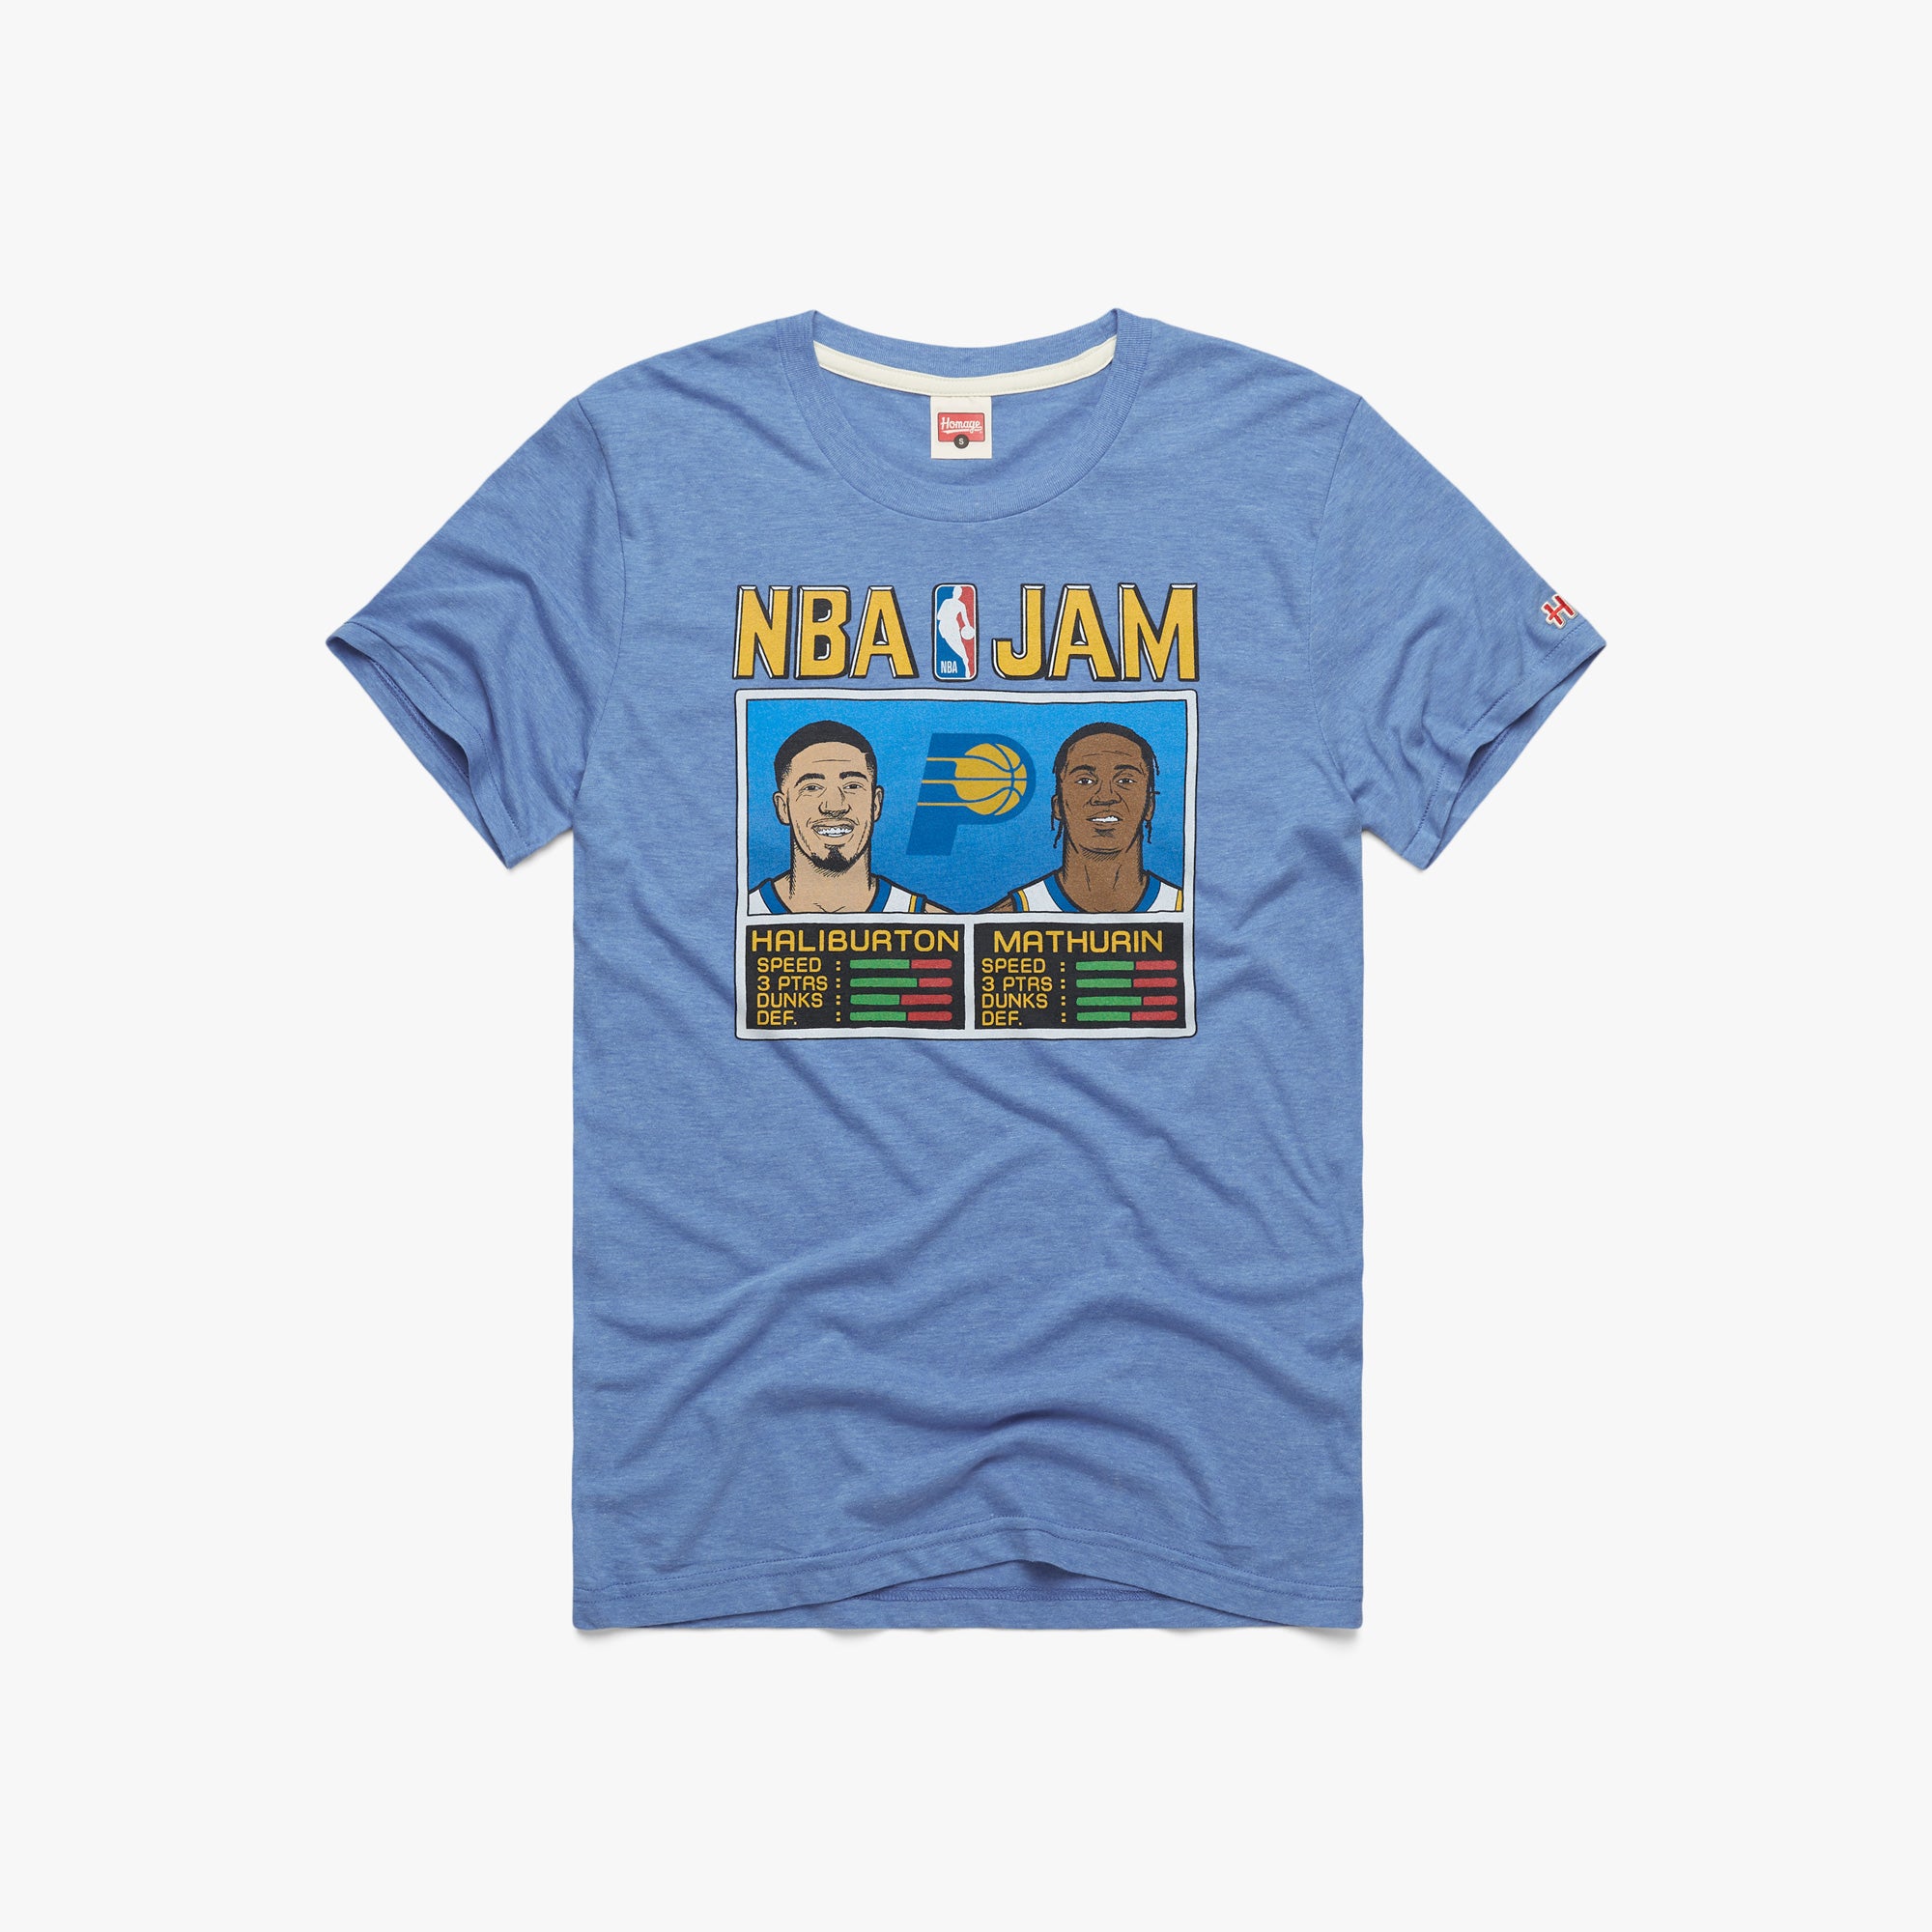 Homage Store Nba Jam Grizzlies Morant And Jackson Shirt, hoodie, sweater  and long sleeve